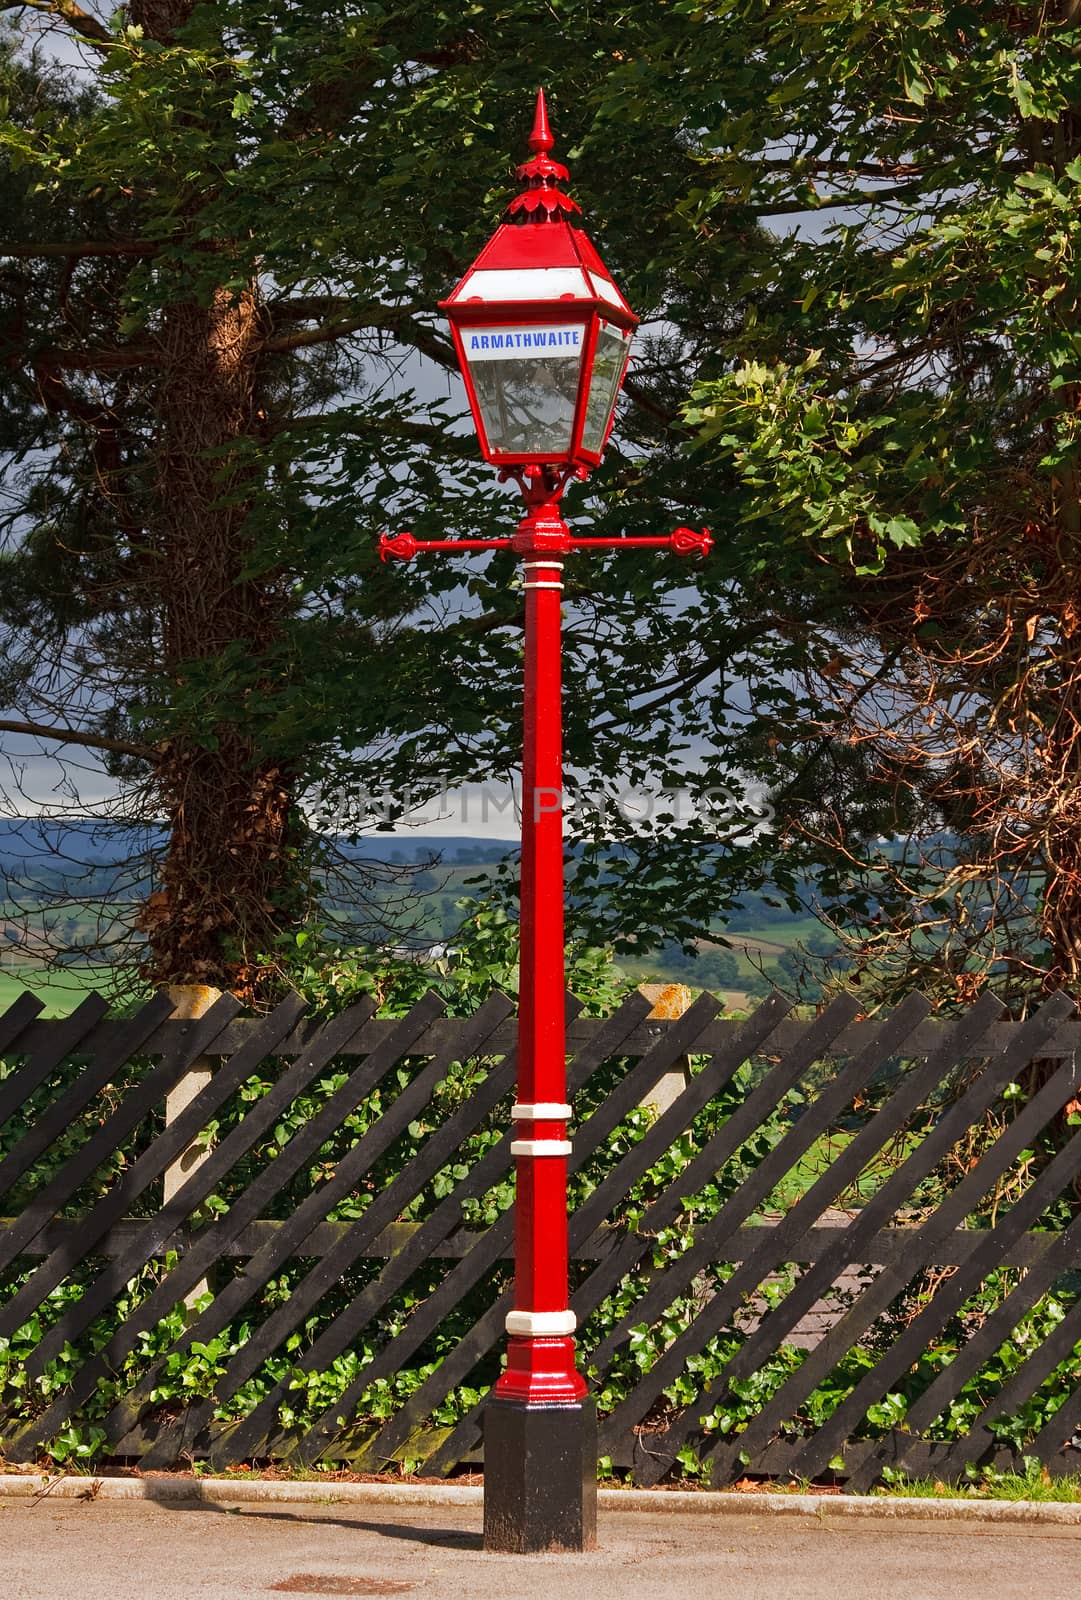 The traditional light is situated on the platform of Armathwaite station in Cumbria, northern England on the historic Settle to Carlisle railway. The line features many faithfully restored fixtures.